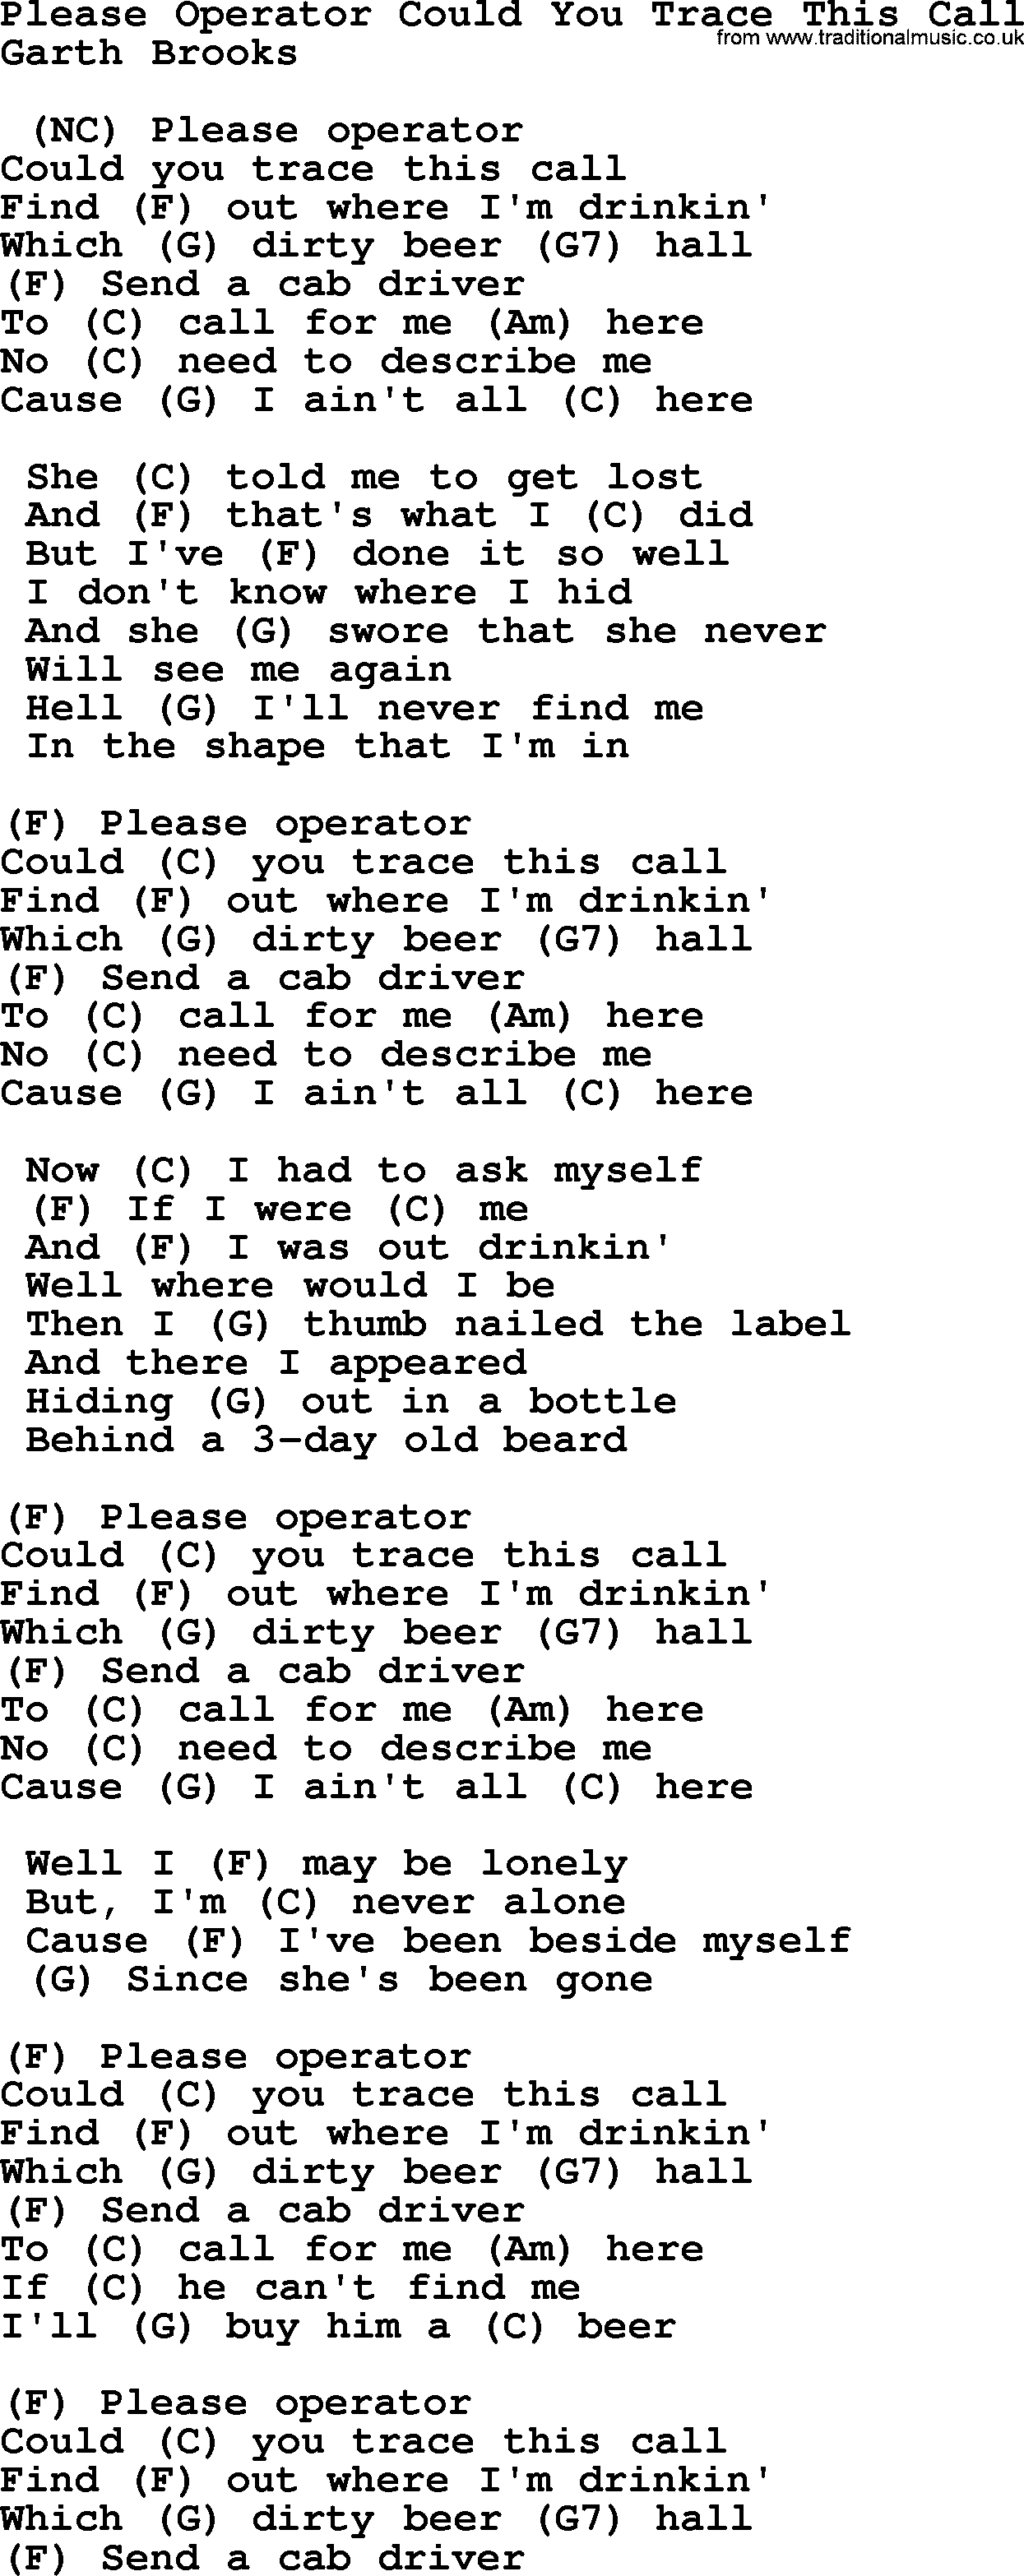 Garth Brooks song: Please Operator Could You Trace This Call, lyrics and chords